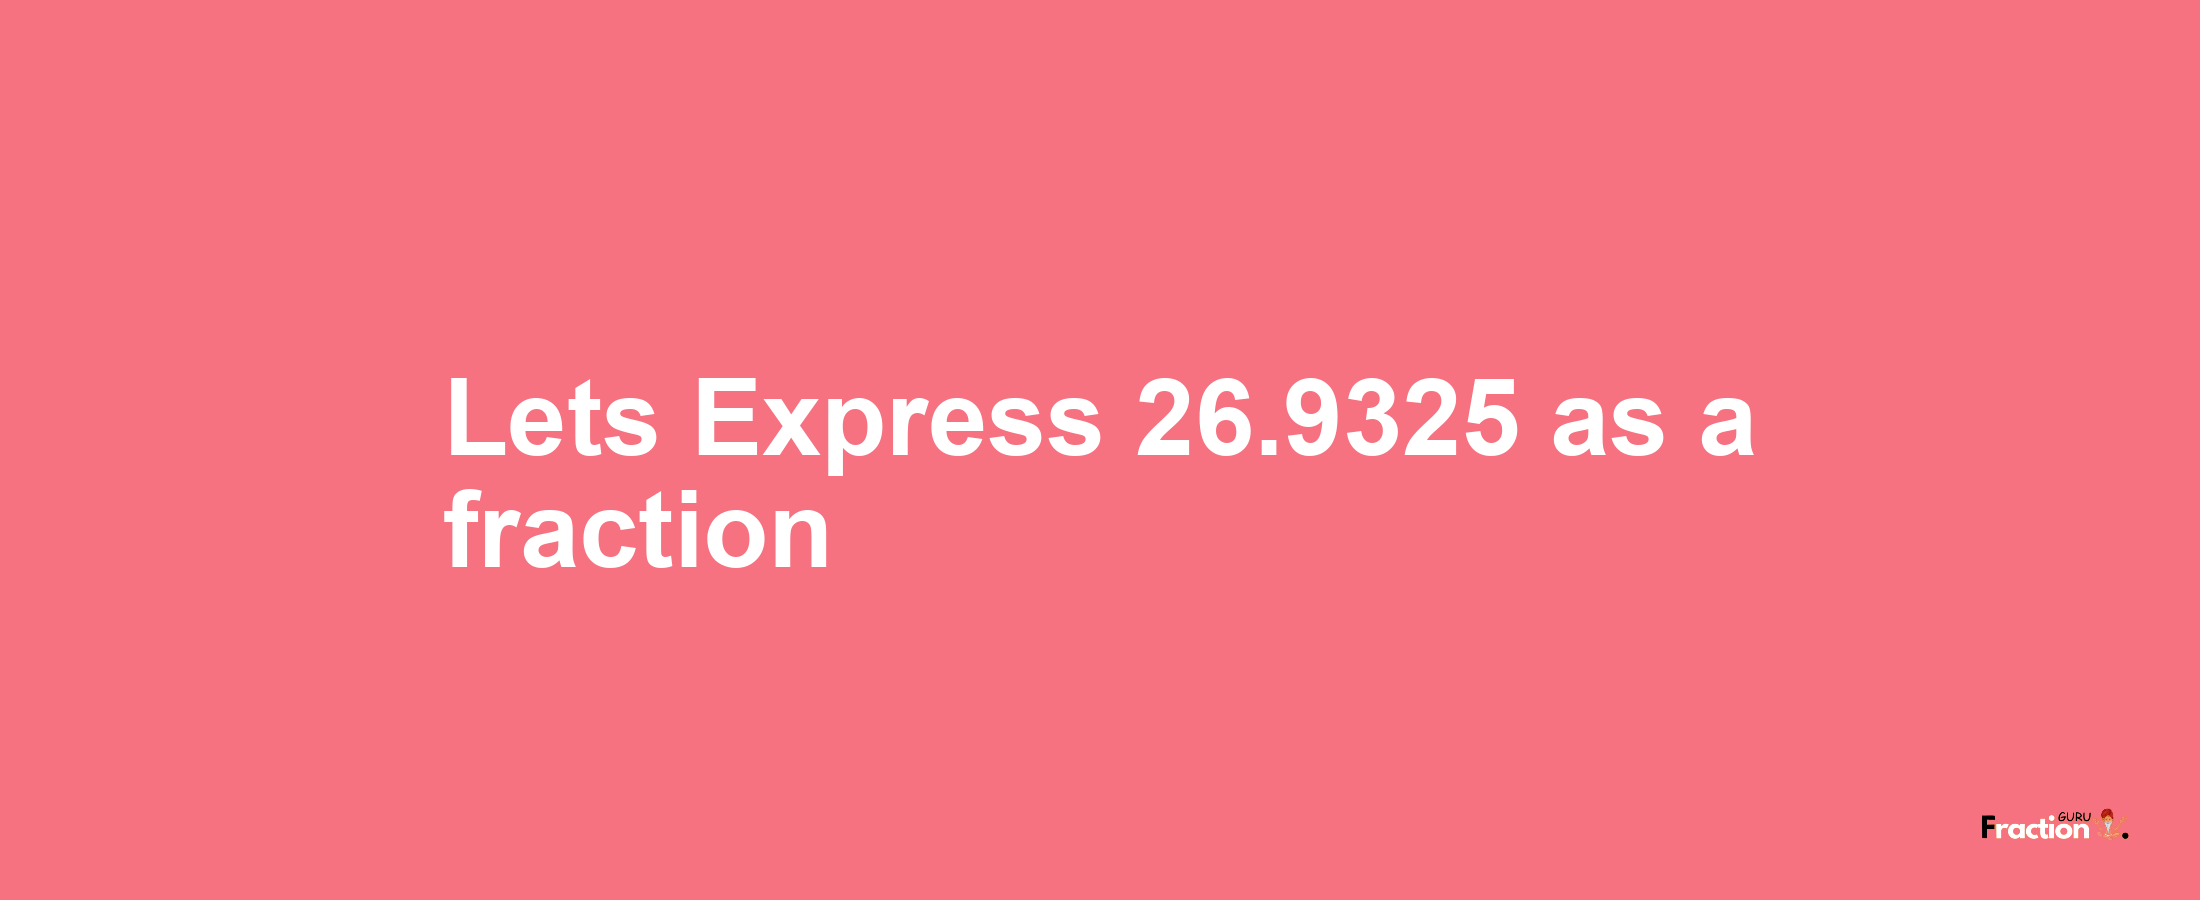 Lets Express 26.9325 as afraction